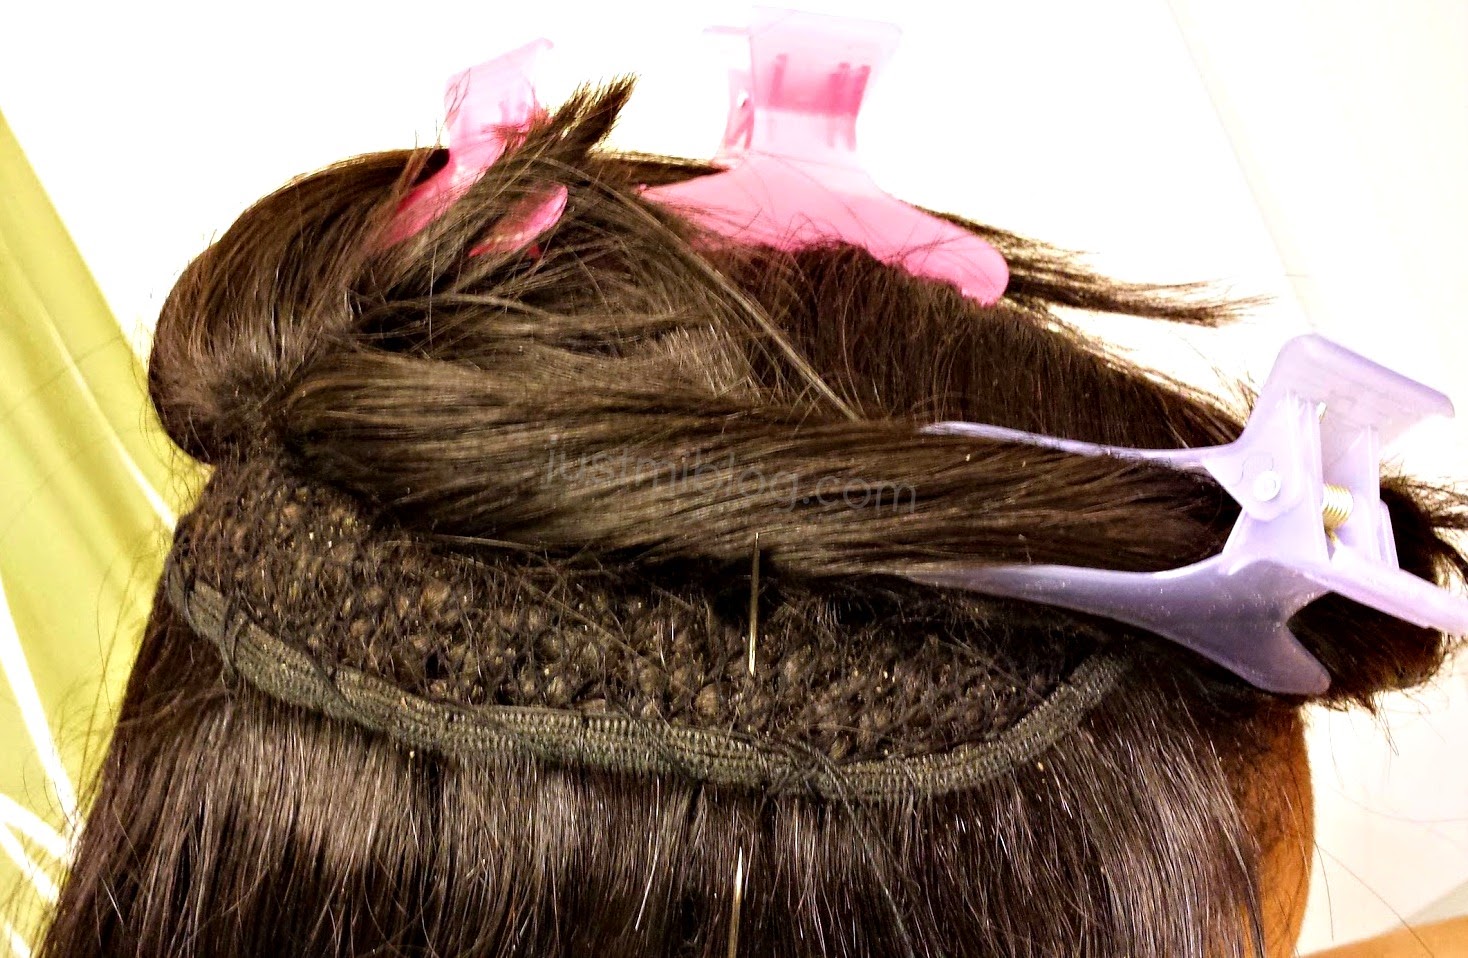 re-sewing extensions or track into natural hair